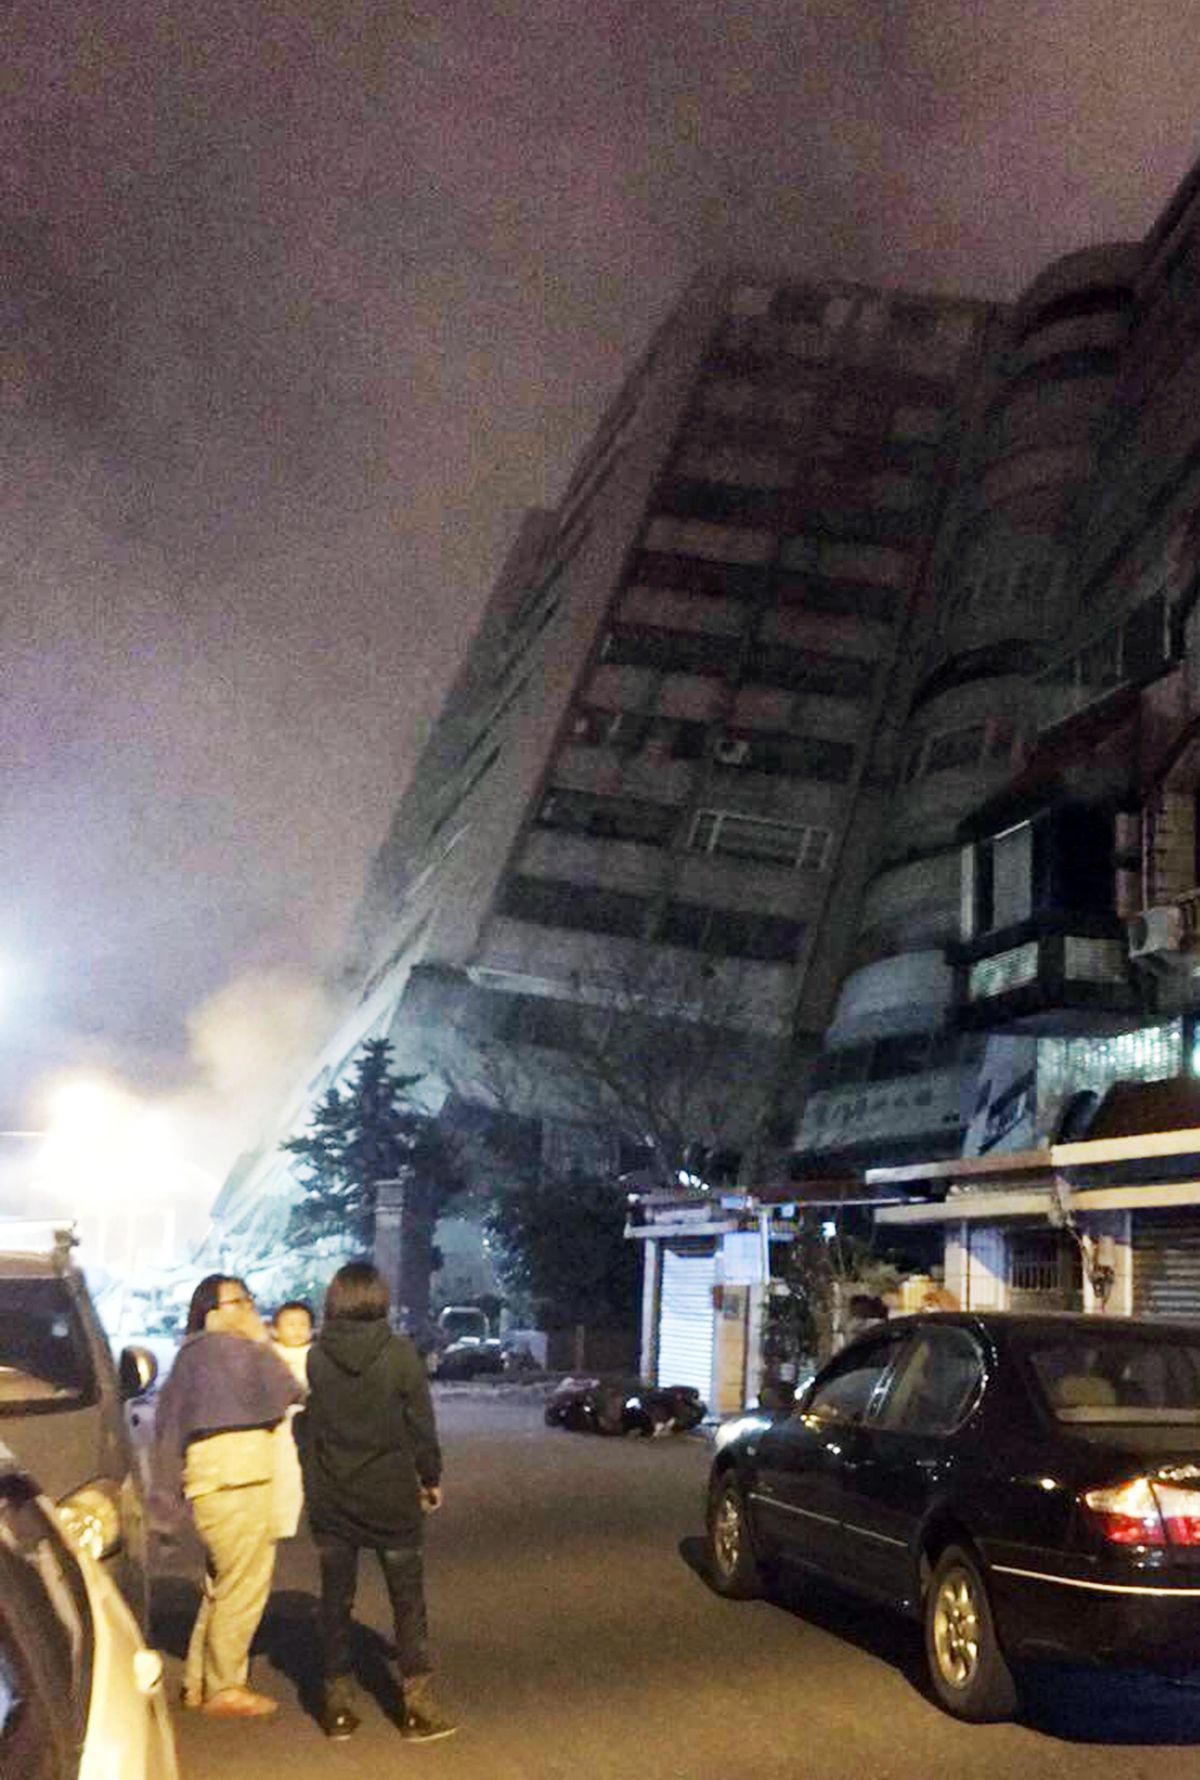 In this photo released by Hualien County Fire Bureau, Taiwanese people watching a building that collapsed on its side from an early morning earthquake in Hualien County, eastern Taiwan, early Wednesday, Feb. 7 2018. A 6.4-magnitude earthquake has struck eastern Taiwan, according to the U.S. Geological Survey. (Hualien County Fire Bureau / AP)